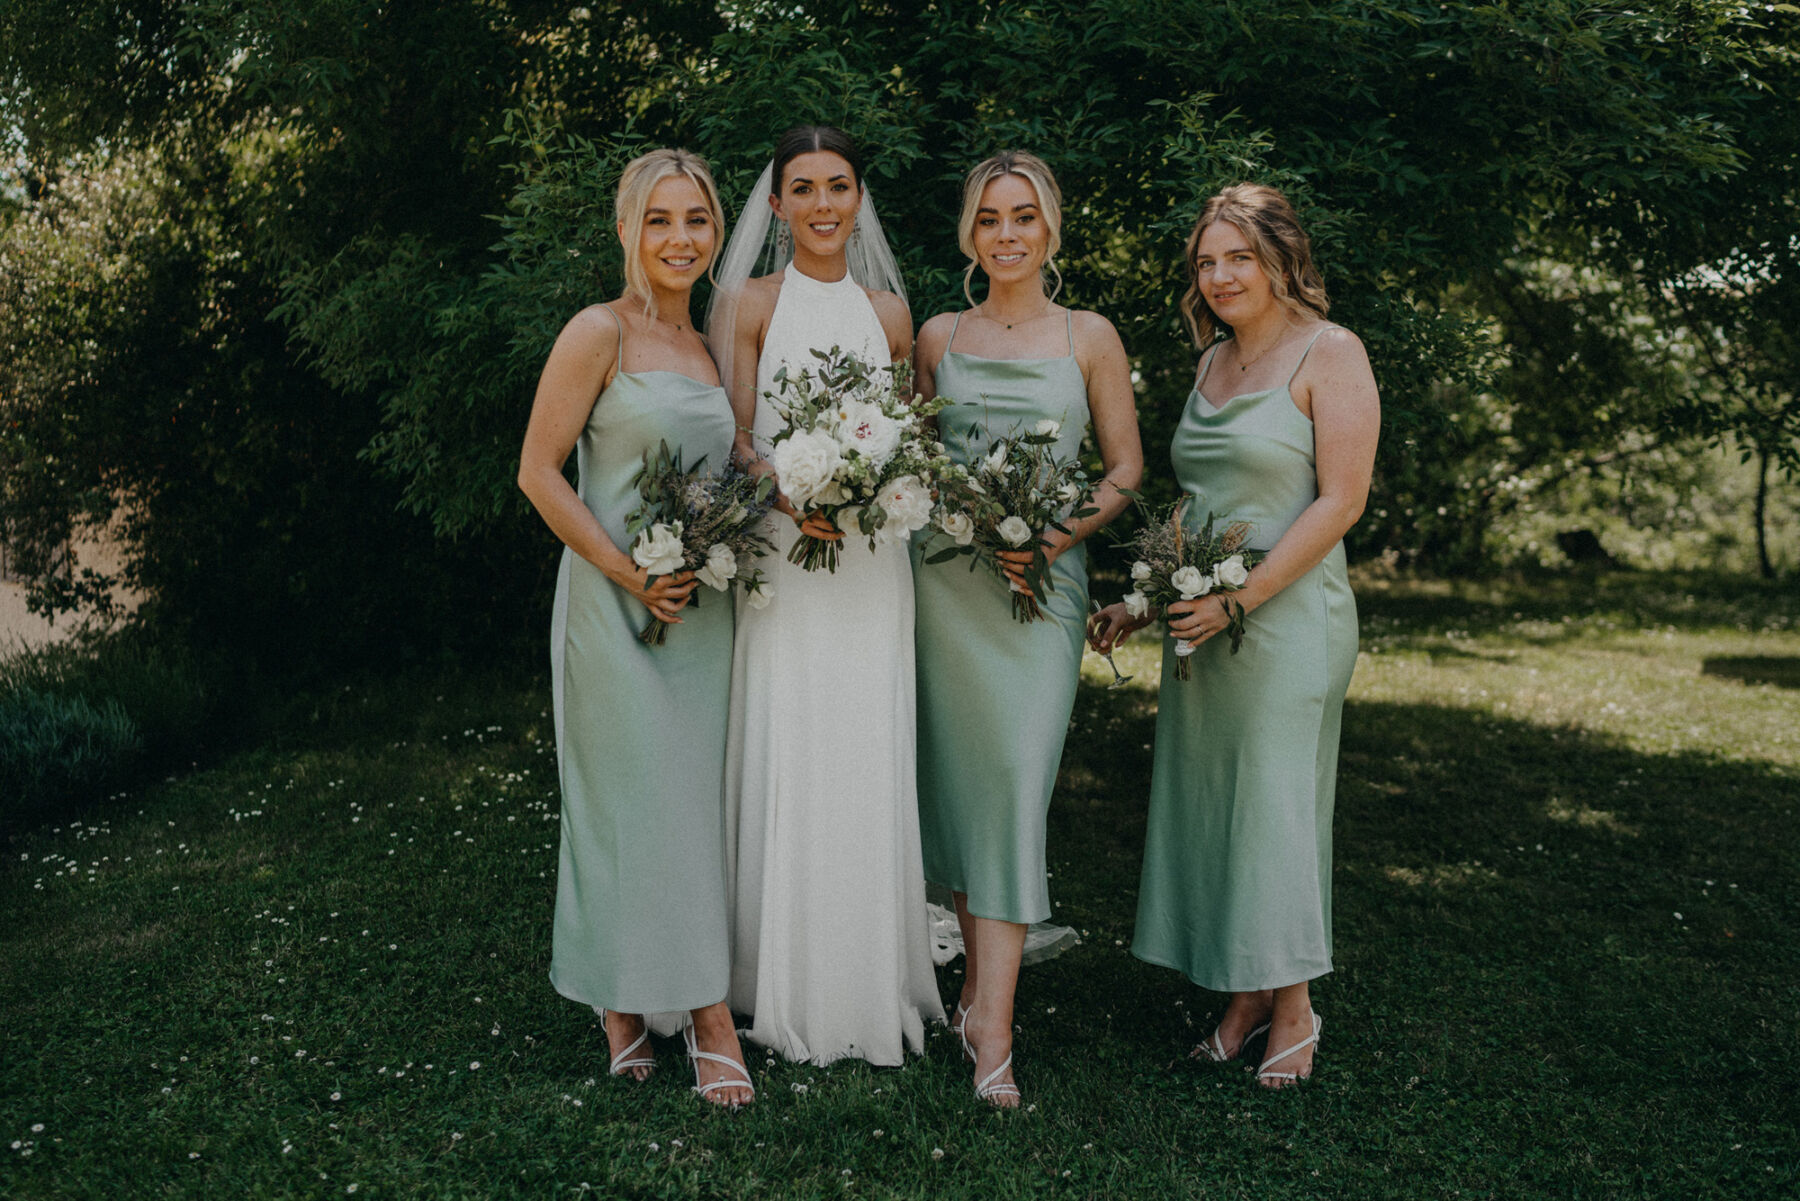 Bride in a halterneck wedding dress with her bridesmaids in pale green dresses holding all-white bouquets.